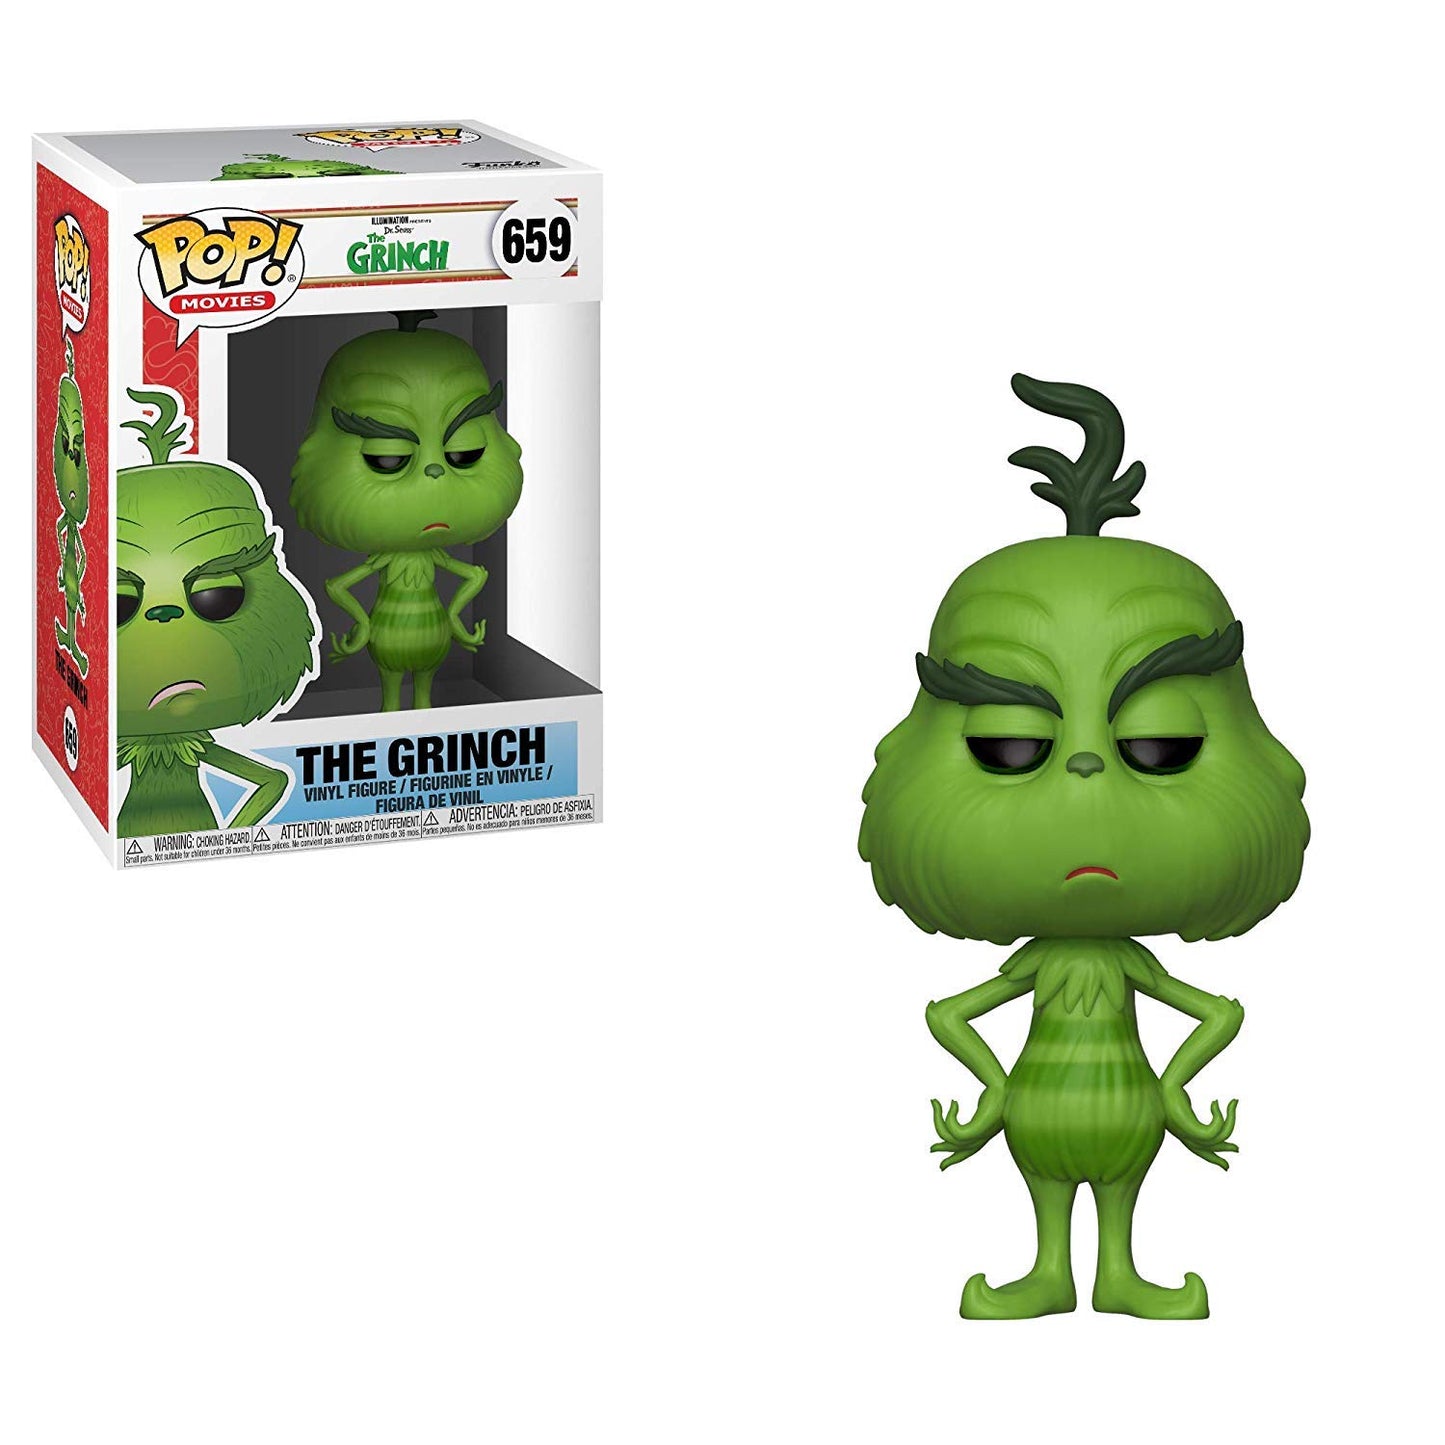 Funko POP! Animation: The Grinch Movie - The Grinch